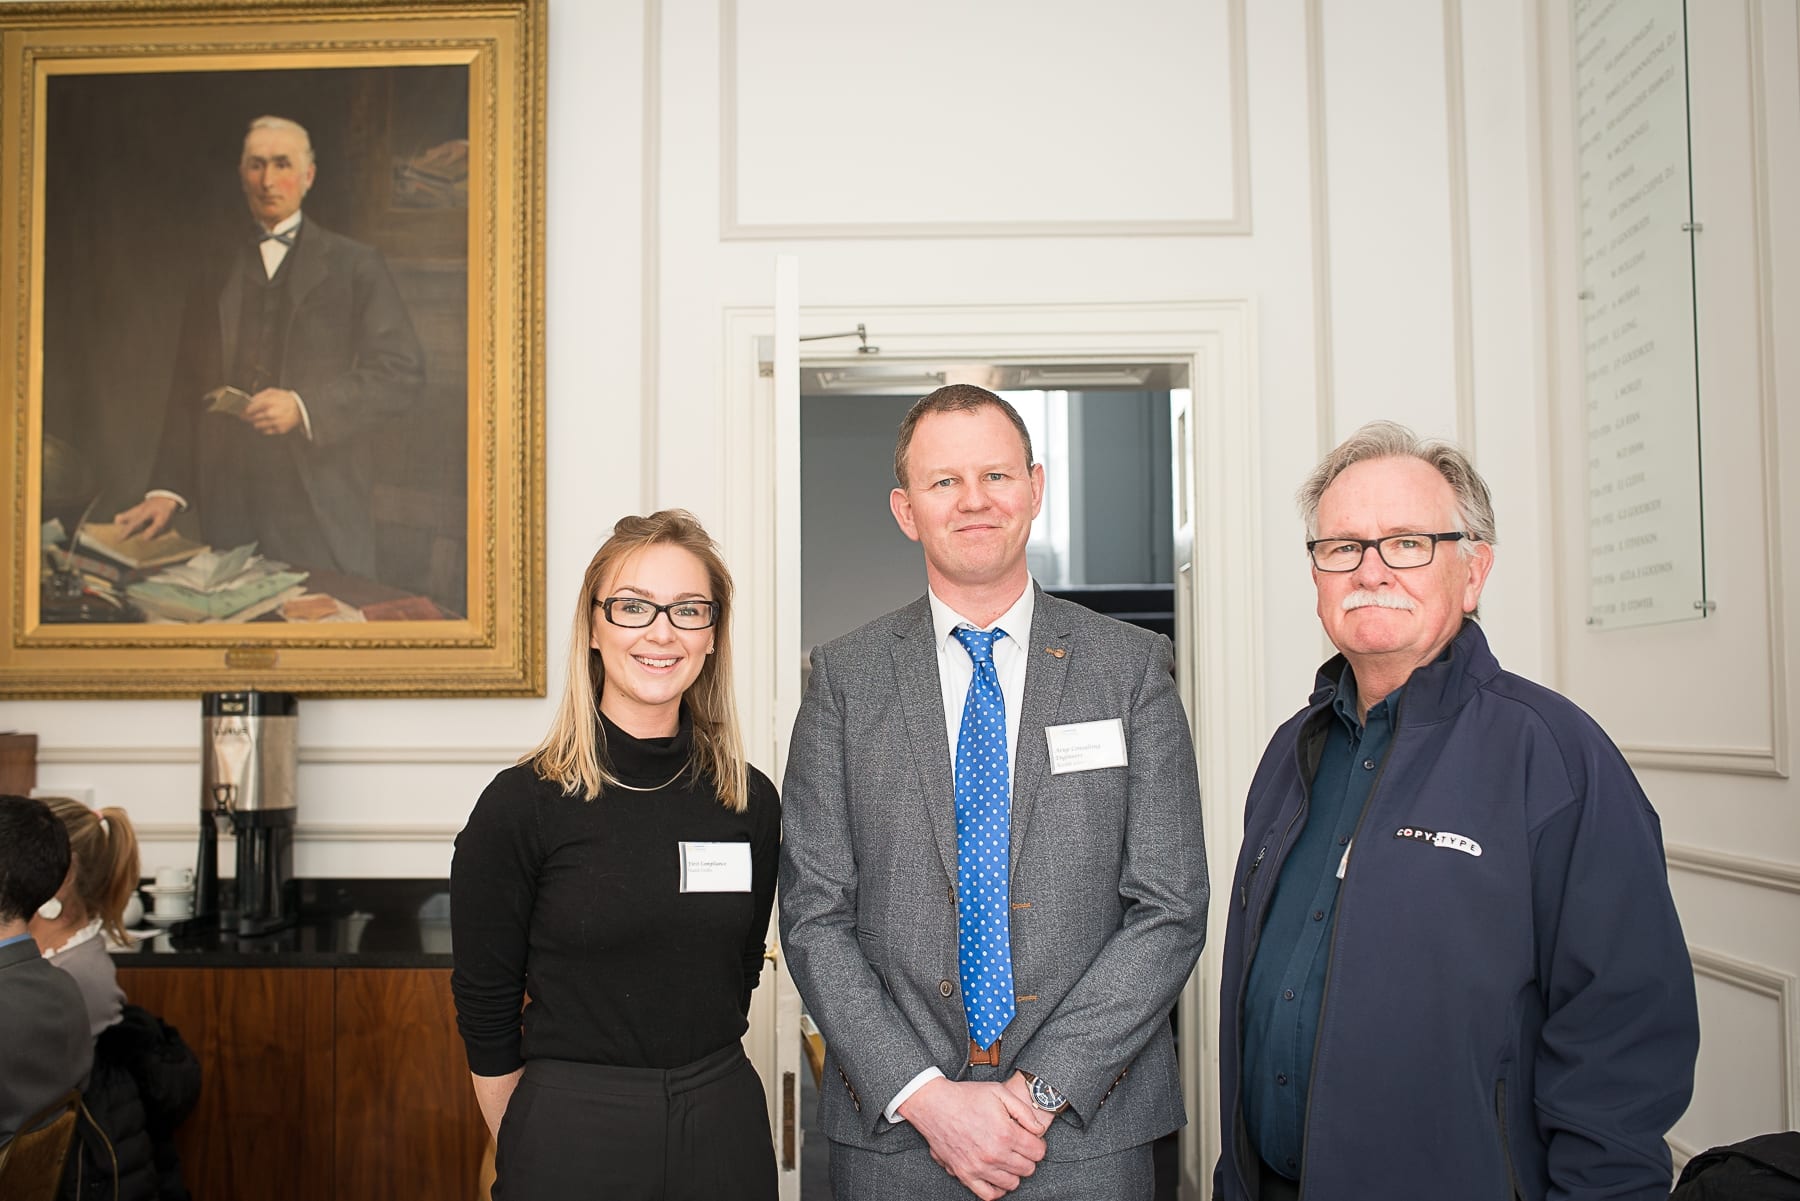 At the Limerick Chamber Skillnet Working Lunchtime Networking with Donal Fitzgibbon was From left to right: Niamh Griffin - First Compliance, Keith Greville - Arup Consulting Engineers, Tony Carey - Copytype
Image by Morning Star Photography